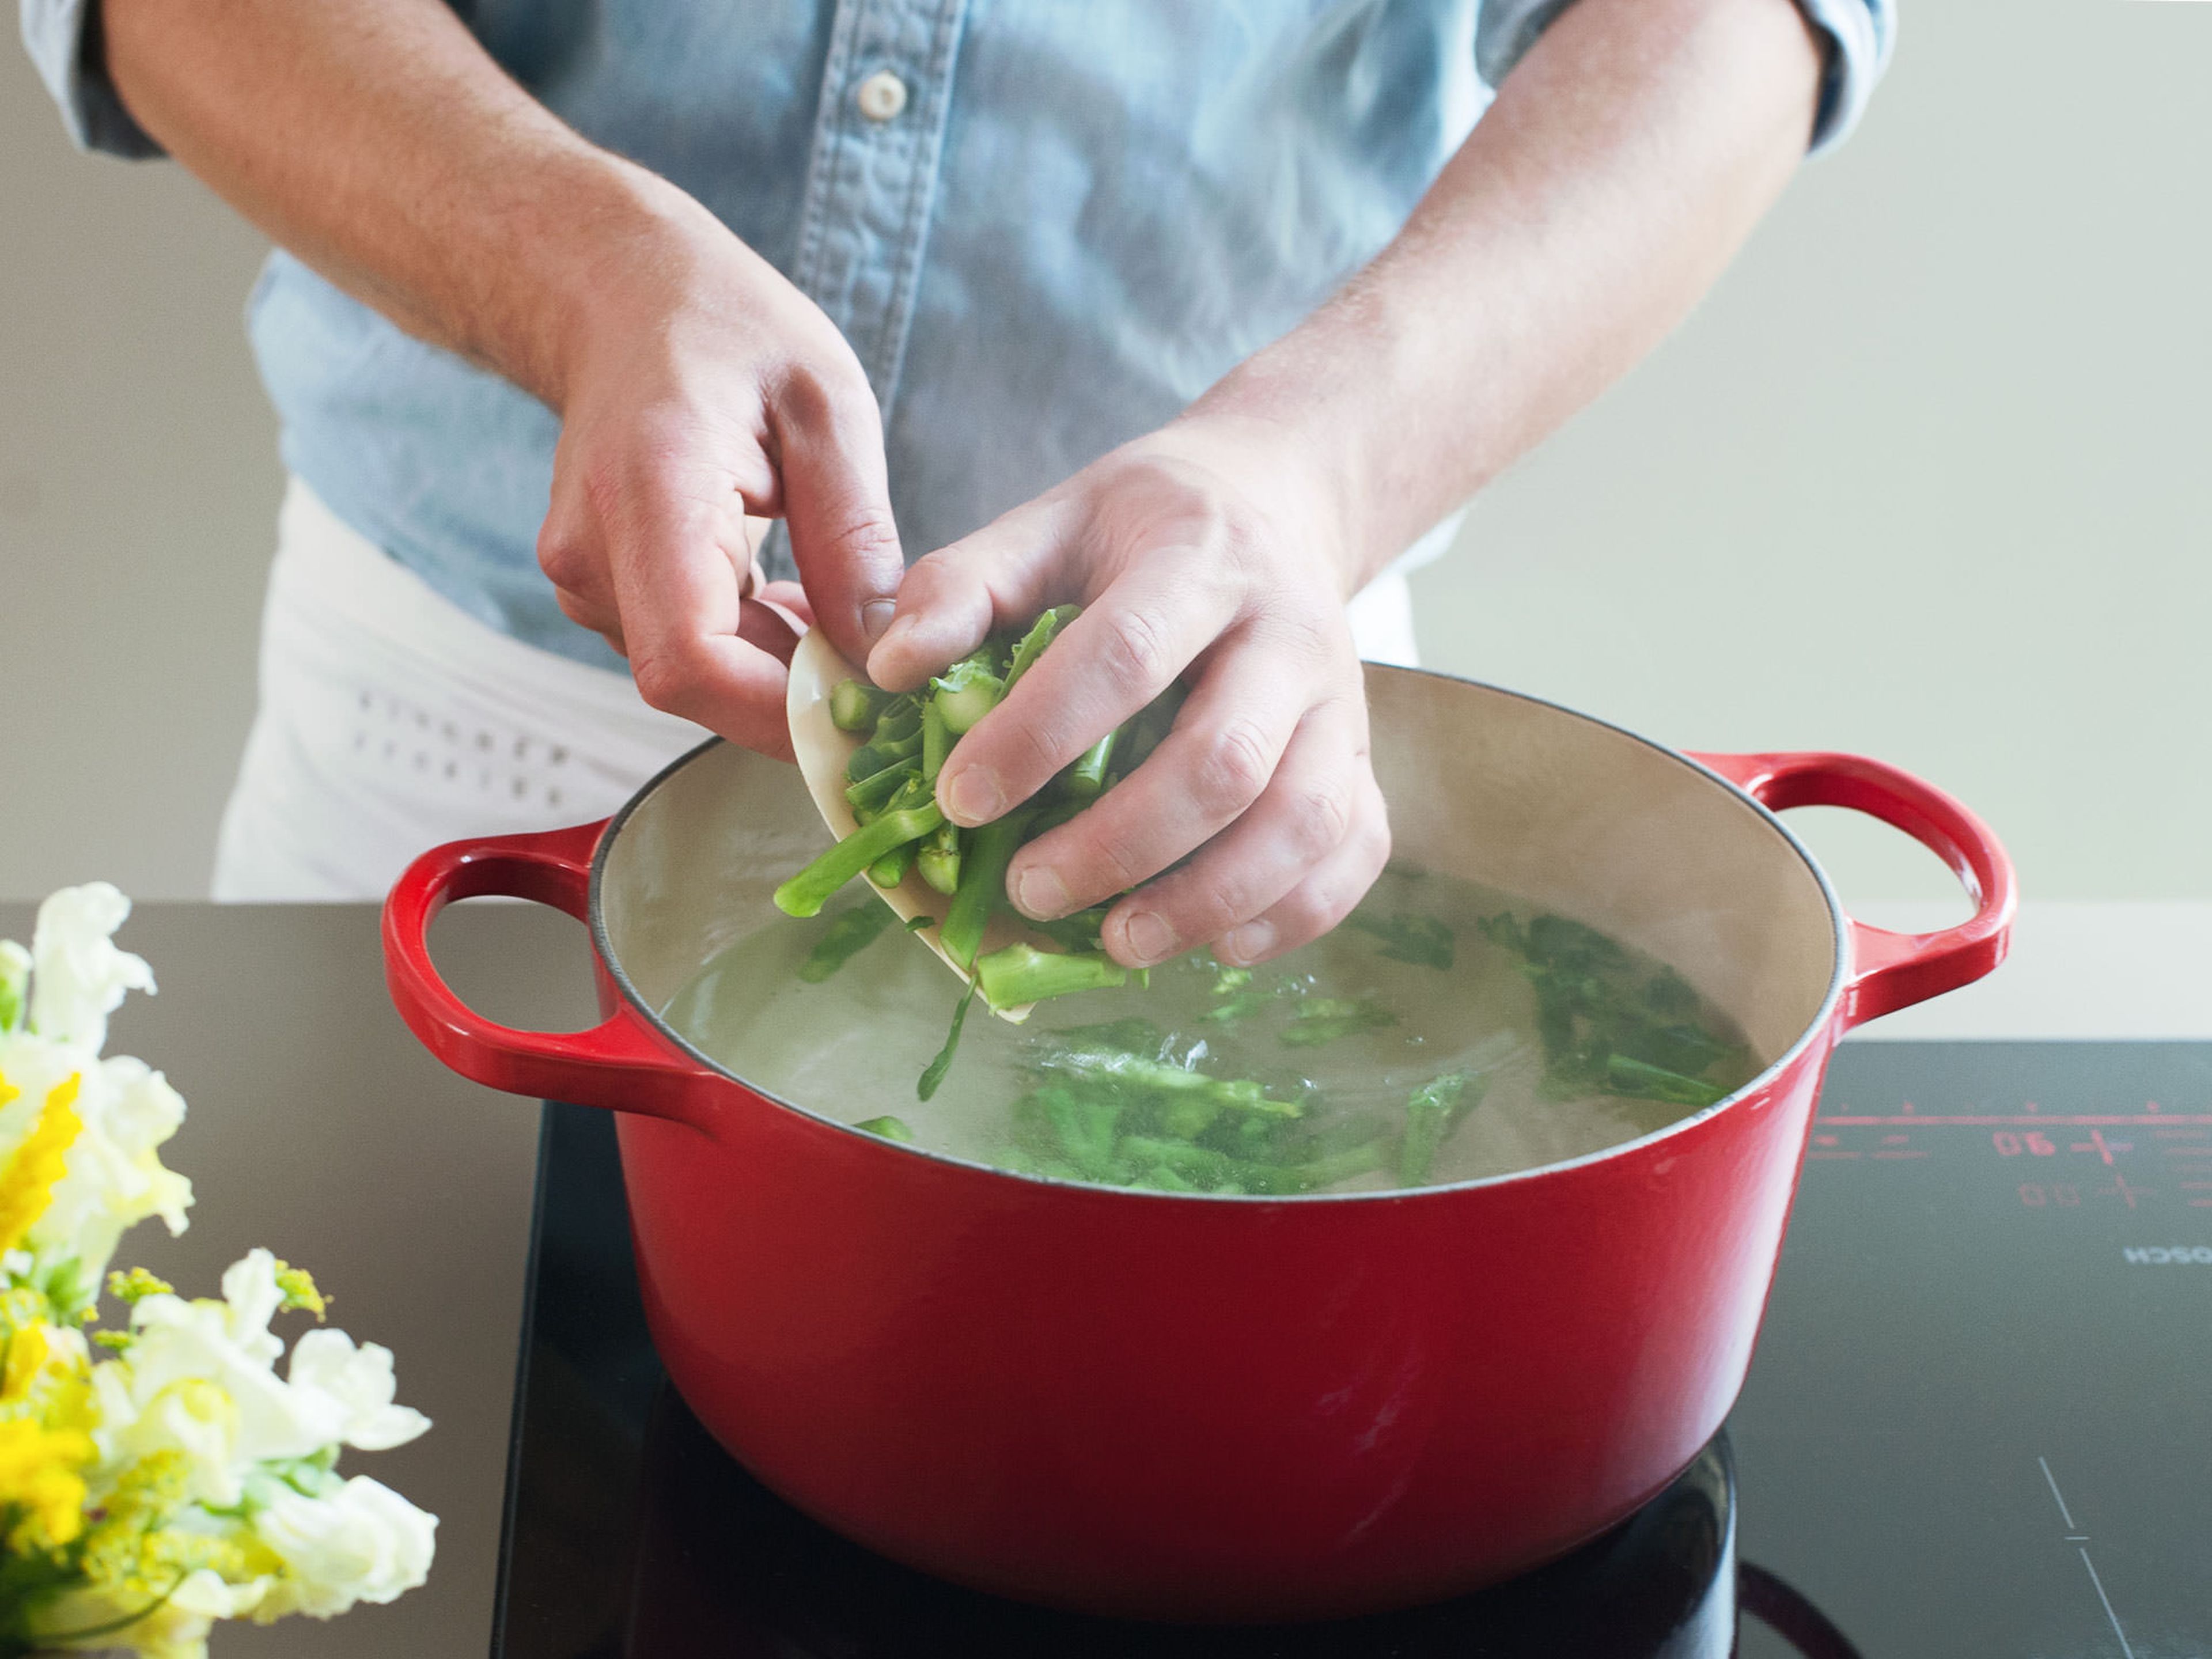 Fill a large saucepan with water and bring to a boil, then add salt. Add rapini stems and cook for approx. 1 – 2 min. until slightly tender; do not remove from water.